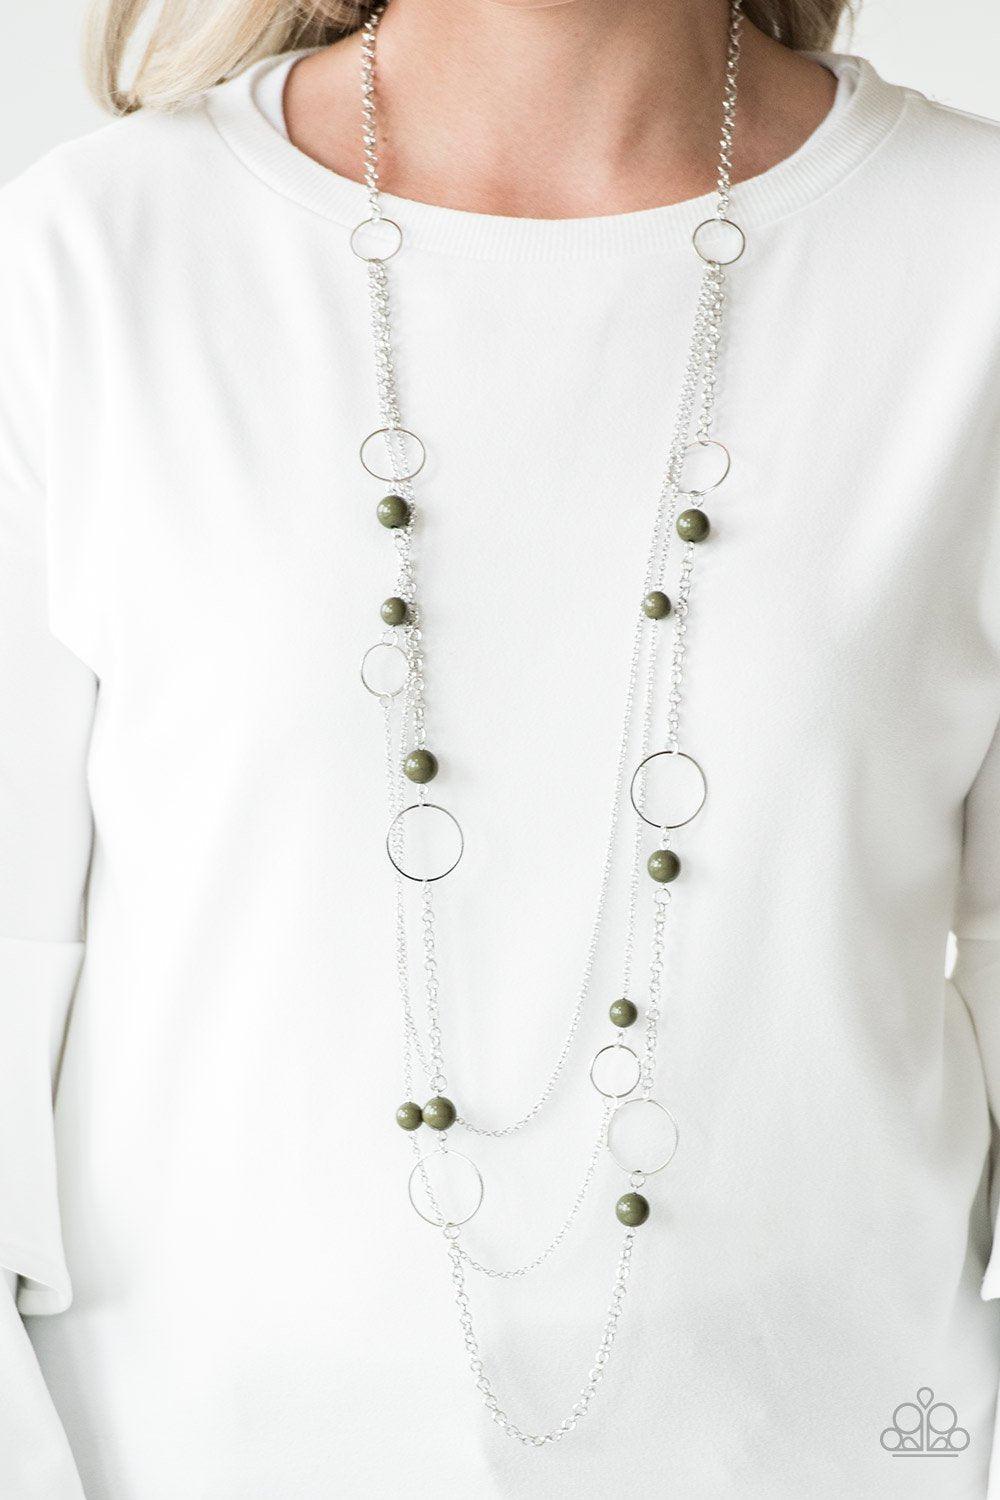 Beachside Babe Silver and Green Necklace - Paparazzi Accessories-CarasShop.com - $5 Jewelry by Cara Jewels